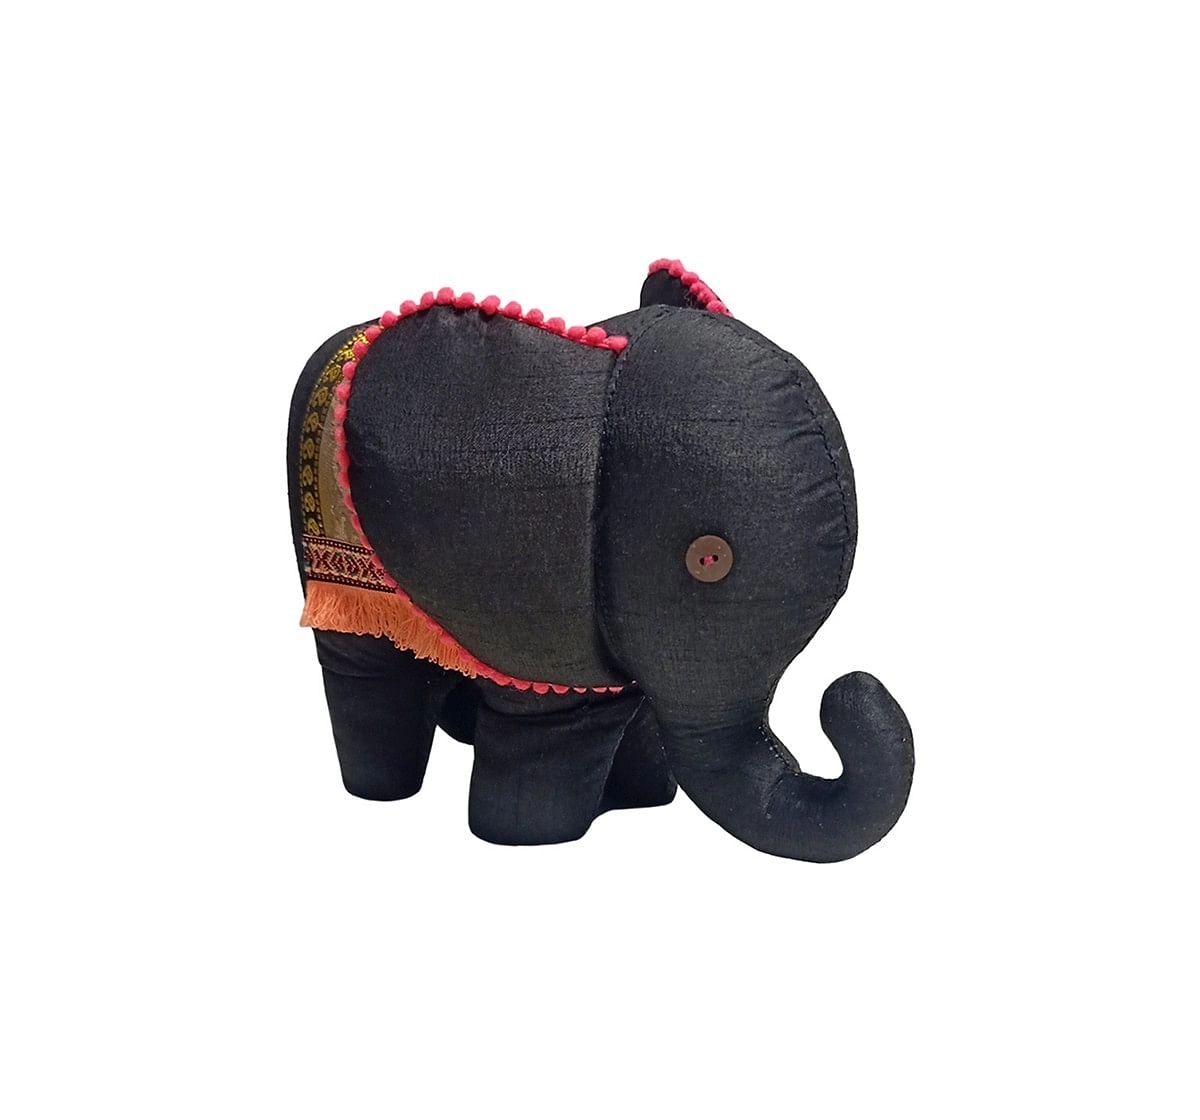 Vibrant India VI Elephant Soft Toy M for Kids age 3Y+ - 14 Cm 